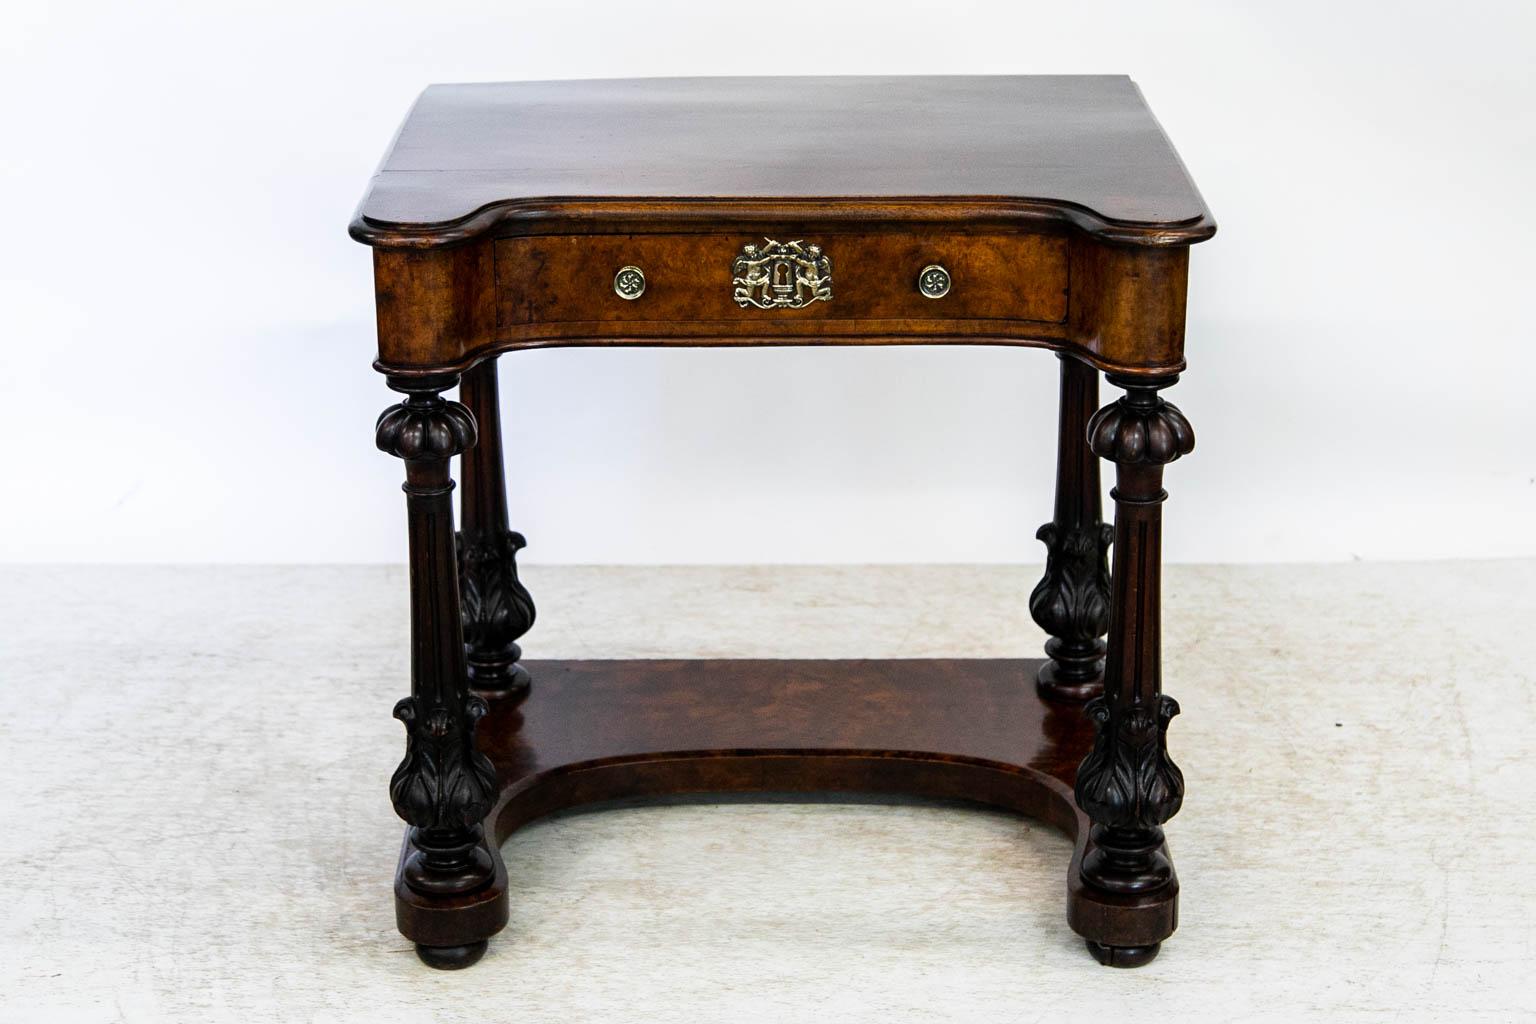 William IV Mahogany & Burled Walnut Side Table In Good Condition For Sale In Wilson, NC